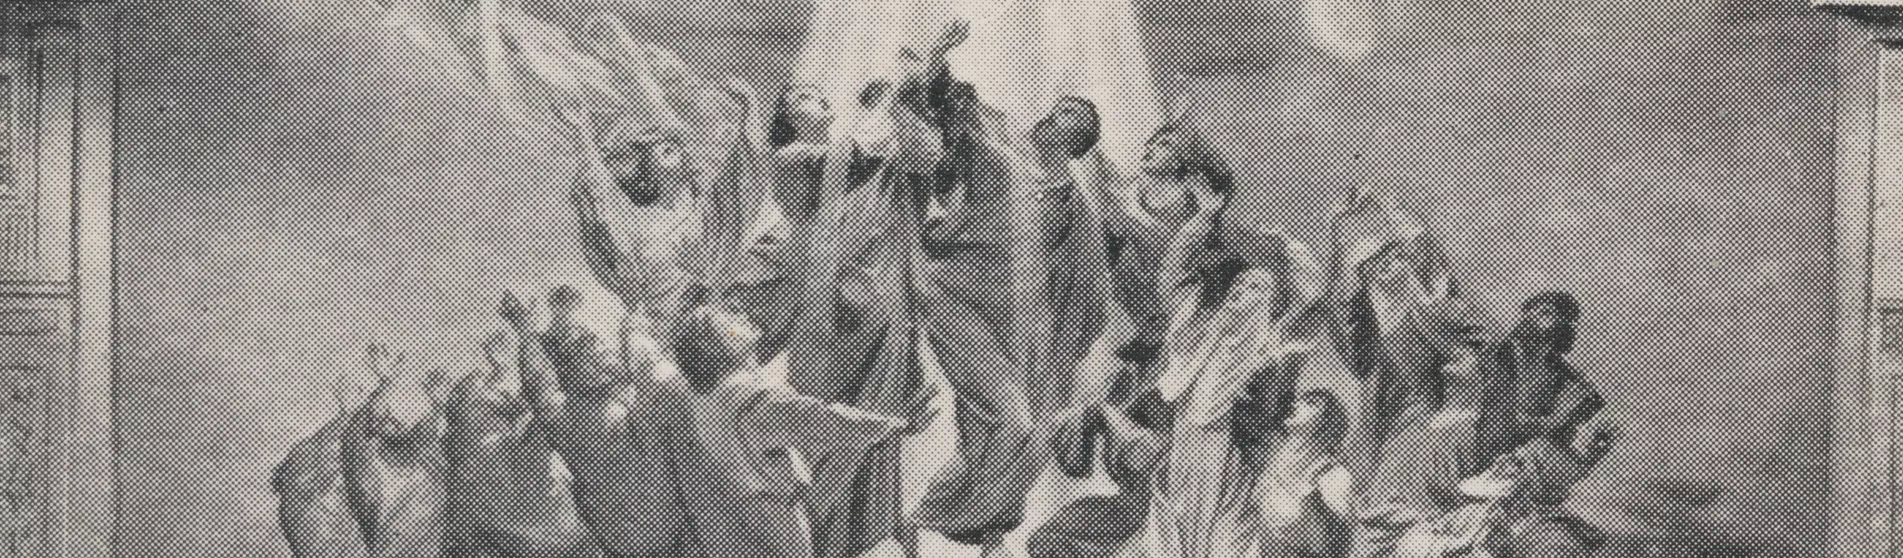 Partial image of the Ascension